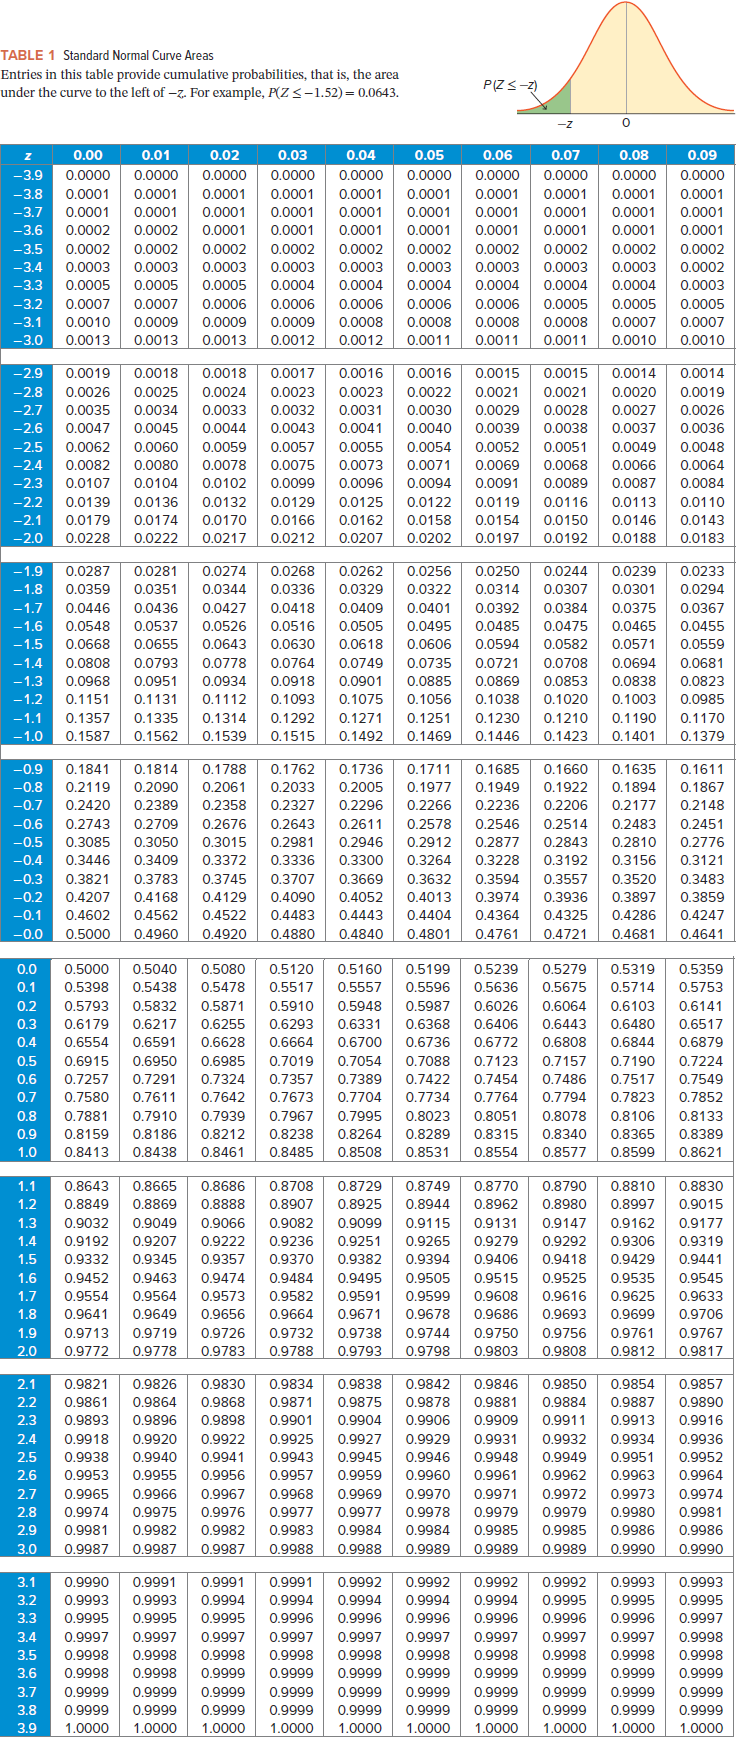 TABLE 1 Standard Normal Curve Areas
Entries in this table provide cumulative probabilities, that is, the area
under the curve to the left of -z. For example, P(Z<-1.52) = 0.0643.
P(Z<-z)
-z
0.00
0.01
0.02
0.03
0.04
0.05
0.06
0.07
0.08
0.09
-3.9
0.0000
0.0000
0.0000
0.0000
0.0000
0.0000
0.0000
0.0000
0.0000
0.0000
-3.8
0.0001
0.0001
0.0001
0.0001
0.0001
0.0001
0.0001
0.0001
0.0001
0.0001
0.0001
0.0001
-3.7
0.0001
0.0001
0.0001
0.0001
0.0001
0.0001
0.0001
0.0001
0.0001
-3.6
0.0002
0.0002
0.0001
0.0001
0.0001
0.0001
0.0001
0.0001
0.0001
0.0002
0.0003
-3.5
0.0002
0.0002
0.0002
0.0002
0.0003
0.0002
0.0002
0.0002
0.0002
0.0002
0.0003
0.0004
-3.4
0.0003
0.0003
0.0003
0.0003
0.0003
0.0003
0.0002
-3.3
0.0005
0.0005
0.0005
0.0004
0.0004
0.0004
0.0004
0.0004
0.0003
0.0005
0.0008
-3.2
0.0007
0.0007
0.0006
0.0006
0.0006
0.0006
0.0006
0.0005
0.0005
-3.1
0.0010
0.0009
0.0009
0.0009
0.0008
0.0008
0.0008
0.0007
0.0007
-3.0
0.0013
0.0013
0.0013
0.0012
0.0012
0.0011
0.0011
0.0011
0.0010
0.0010
-2.9
0.0019
0.0018
0.0018
0.0017
0.0016
0.0016
0.0015
0.0015
0.0014
0.0014
0.0019
0.0026
-2.8
0.0026
0.0025
0.0024
0.0023
0.0023
0.0022
0.0021
0.0021
0.0020
-2.7
0.0035
0.0034
0.0033
0.0032
0.0031
0.0030
0.0029
0.0028
0.0027
-2.6
0.0047
0.0045
0.0044
0.0043
0.0041
0.0040
0.0039
0.0038
0.0037
0.0036
0.0055
0.0073
0.0096
-2.5
0.0062
0.0060
0.0059
0.0057
0.0054
0.0052
0.0051
0.0049
0.0048
-2.4
0.0082
0.0080
0.0078
0.0075
0.0071
0.0069
0.0068
0.0066
0.0064
-2.3
0.0107
0.0104
0.0102
0.0099
0.0094
0.0091
0.0089
0.0087
0.0084
0.0132
0.0170
-2.2
0.0139
0.0136
0.0129
0.0125
0.0122
0.0119
0.0116
0.0113
0.0110
-2.1
0.0179
0.0174
0.0166
0.0162
0.0158
0.0154
0.0150
0.0146
0.0143
-2.0
0.0228
0.0222
0.0217
0.0212
0.0207
0.0202
0.0197
0.0192
0.0188
0.0183
-1.9
0.0287
0.0281
0.0274
0.0268
0.0262
0.0256
0.0250
0.0244
0.0239
0.0233
-1.8
0.0359
0.0351
0.0344
0.0336
0.0329
0.0322
0.0314
0.0307
0.0301
0.0294
-1.7
0.0446
0.0436
0.0427
0.0418
0.0409
0.0401
0.0392
0.0384
0.0375
0.0367
0.0475
0.0582
-1.6
0.0548
0.0537
0.0526
0.0516
0.0505
0.0495
0.0485
0.0465
0.0455
-1.5
0.0668
0.0655
0.0643
0.0630
0.0618
0.0606
0.0594
0.0571
0.0559
-1.4
0.0808
0.0793
0.0778
0.0764
0.0749
0.0735
0.0721
0.0708
0.0694
0.0681
0.0968
0.1151
-1.3
0.0951
0.0934
0.0918
0.0901
0.0885
0.0869
0.0853
0.0838
0.0823
-1.2
0.1131
0.1112
0.1093
0.1075
0.1056
0.1038
0.1020
0.1003
0.0985
0.1271
0.1492
-1.1
0.1357
0.1335
0.1314
0.1292
0.1251
0.1230
0.1210
0.1190
0.1170
-1.0
0.1587
0.1562
0.1539
0.1515
0.1469
0.1446
0.1423
0.1401
0.1379
0.1736
0.2005
0.1660
0.1922
0.2206
-0.9
0.1841
0.1814
0.1788
0.1762
0.1711
0.1685
0.1635
0.1611
0.2090
0.2033
0.2327
-0.8
0.2119
0.2061
0.1977
0.1949
0.1894
0.1867
-0.7
0.2420
0.2389
0.2358
0.2296
0.2266
0.2236
0.2177
0.2148
0.2643
0.2611
0.2946
0.2546
0.2483
0.2810
-0.6
0.2743
0.2709
0.2676
0.2578
0.2514
0.2451
-0.5
0.3085
0.3050
0.3015
0.2981
0.2912
0.2877
0.2843
0.2776
-0.4
0.3446
0.3409
0.3372
0.3336
0.3300
0.3264
0.3228
0.3192
0.3156
0.3121
-0.3
0.3821
0.3783
0.3745
0.3707
0.3669
0.3632
0.3594
0.3557
0.3520
0.3483
-0.2
0.4207
0.4168
0.4129
0.4090
0.4052
0.4013
0.3974
0.3936
0.3897
0.3859
-0.1
0.4602
0.4562
0.4522
0.4483
0.4443
0.4404
0.4364
0.4325
0.4286
0.4247
-0.0
0.5000
0.4960
0.4920
0.4880
0.4840
0.4801
0.4761
0.4721
0.4681
0.4641
0.5239
0.5636
0.0
0.5000
0.5040
0.5080
0.5120
0.5160
0.5199
0.5279
0.5319
0.5359
0.1
0.5398
0.5438
0.5478
0.5517
0.5557
0.5596
0.5675
0.5714
0.5753
0.2
0.5793
0.5832
0.5871
0.5910
0.5948
0.5987
0,6026
0.6064
0.6103
0.6141
0.3
0.6179
0.6217
0.6255
0.6293
0.6331
0.6368
0.6406
0.6443
0.6480
0.6517
0.4
0.6554
0.6591
0.6628
0.6664
0.6700
0.6736
0.6772
0.6808
0.6844
0.6879
0.6915
0.6950
0.7291
0.6985
0.7054
0.7224
0.7549
0.5
0.7019
0.7088
0.7123
0.7157
0.7190
0.6
0.7257
0.7324
0.7357
0.7389
0.7422
0.7454
0.7486
0.7517
0.7
0.7580
0.7611
0.7642
0.7673
0.7704
0.7734
0.7764
0.7794
0.7823
0.7852
0.7881
0.7939
0.7995
0.8264
0.8051
0.8315
0.8
0.7910
0.7967
0.8023
0.8078
0.8106
0.8133
0.8186
0.8438
0.8340
0.8577
0.9
0.8159
0.8212
0.8238
0.8289
0.8365
0.8389
1.0
0.8413
0.8461
0.8485
0.8508
0.8531
0.8554
0.8599
0.8621
0.8729
0.8925
0.8770
0.8962
0.8810
0.8997
1.1
0.8643
0.8665
0.8686
0.8708
0.8749
0.8790
0.8830
1.2
0.8849
0.8869
0.8888
0.8907
0.8944
0.8980
0.9015
1.3
0.9032
0.9049
0.9066
0.9082
0.9099
0.9115
0.9131
0.9147
0.9162
0.9177
1.4
0.9192
0.9207
0.9222
0.9236
0.9251
0.9265
0.9279
0.9292
0.9306
0.9319
0.9406
0.9515
1.5
0.9332
0.9345
0.9357
0.9370
0.9382
0.9394
0.9418
0.9429
0.9441
1.6
0.9452
0,9463
0,9474
0.9484
0.9495
0.9505
0.9525
0.9535
0.9545
1.7
0.9554
0.9564
0.9573
0.9582
0.9591
0.9599
0.9608
0.9616
0.9625
0.9633
1.8
0.9641
0,9649
0.9656
0.9664
0.9671
0.9678
0.9686
0.9693
0.9699
0.9706
0.9744
0.9798
0.9719
0.9726
0.9750
0.9756
0.9808
1.9
0.9713
0.9732
0.9738
0.9761
0.9767
2.0
0.9772
0.9778
0.9783
0.9788
0.9793
0.9803
0,9812
0.9817
2.1
0.9821
0.9826
0.9830
0.9834
0.9838
0.9842
0.9846
0.9850
0.9854
0.9857
2.2
0.9861
0.9864
0.9868
0.9871
0.9875
0.9878
0.9881
0.9884
0.9887
0.9890
2.3
0.9893
0,9896
0.9898
0.9901
0.9904
0.9906
0.9909
0.9911
0.9913
0.9916
0.9918
0.9938
0.9925
0.9927
0.9945
2.4
0.9920
0.9922
0.9929
0.9931
0.9932
0.9934
0.9936
2.5
0.9940
0.9941
0.9943
0.9946
0.9948
0.9949
0.9951
0.9952
2.6
0.9953
0.9955
0.9956
0.9957
0.9959
0.9960
0.9961
0.9962
0.9963
0,9964
2.7
0.9965
0.9966
0,9967
0.9968
0.9969
0.9970
0.9971
0.9972
0.9973
0.9974
0.9974
0.9981
2.8
0.9975
0.9976
0.9977
0.9977
0.9978
0.9979
0.9979
0.9980
0.9981
2.9
0.9982
0.9982
0,9983
0.9984
0.9984
0.9985
0.9985
0.9986
0.9986
3.0
0.9987
0.9987
0.9987
0.9988
0.9988
0.9989
0,9989
0.9989
0.9990
0.9990
0.9990
0.9993
3.1
0.9991
0.9991
0.9991
0.9992
0.9992
0.9992
0,9992
0.9993
0.9993
3.2
0.9993
0.9994
0,9994
0.9994
0.9994
0,9994
0.9995
0.9995
0.9995
3.3
0.9995
0.9995
0.9995
0.9996
0.9996
0.9996
0.9996
0.9996
0.9996
0.9997
3.4
0.9997
0.9997
0.9997
0.9997
0.9997
0.9997
0.9997
0.9997
0.9997
0.9998
0.9998
0.9999
3.5
0.9998
0.9998
0.9998
0.9998
0.9998
0.9998
0.9998
0.9998
0.9998
3.6
0.9998
0.9998
0,9999
0.9999
0.9999
0.9999
0.9999
0.9999
0.9999
3.7
0.9999
0.9999
0.9999
0.9999
0.9999
0.9999
0.9999
0.9999
0.9999
0.9999
0.9999
1.0000
3.8
0.9999
0.9999
0.9999
0.9999
0,9999
0.9999
0.9999
0.9999
0.9999
3.9
1.0000
1.0000
1.0000
1.0000
1.0000
1.0000
1.0000
1.0000
1.0000
